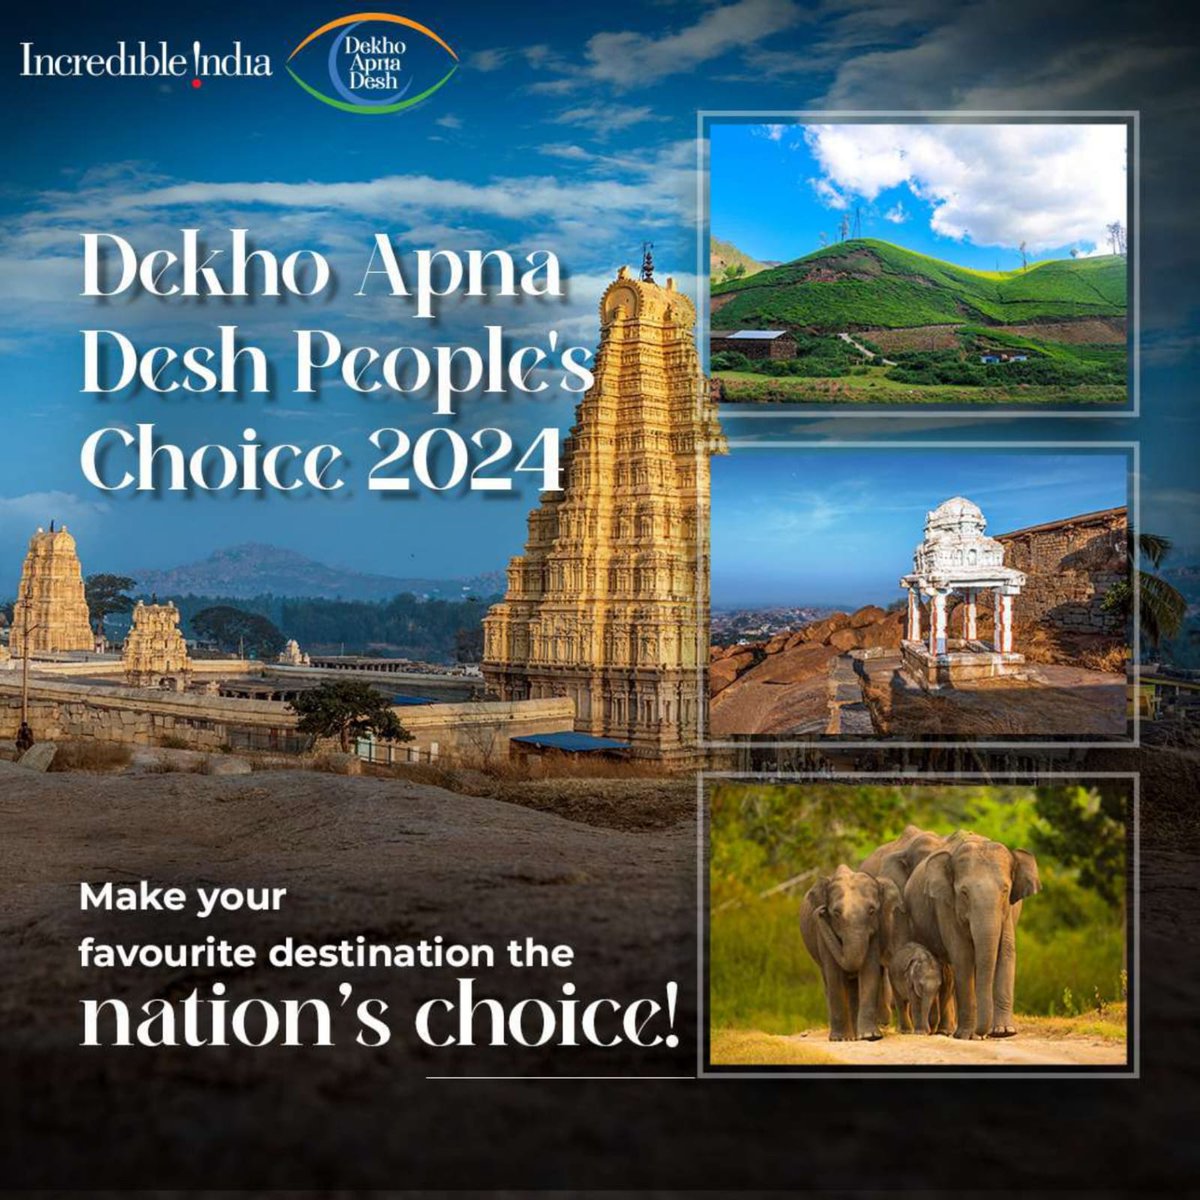 Explore the wonders of @incredibleindia! Hon'ble Prime Minister, Shri @narendramodi, has launched the #DekhoApnaDesh - People's Choice 2024 to seek public responses on most favourite tourist attractions across the country. Choose your favourite tourist attractions across…